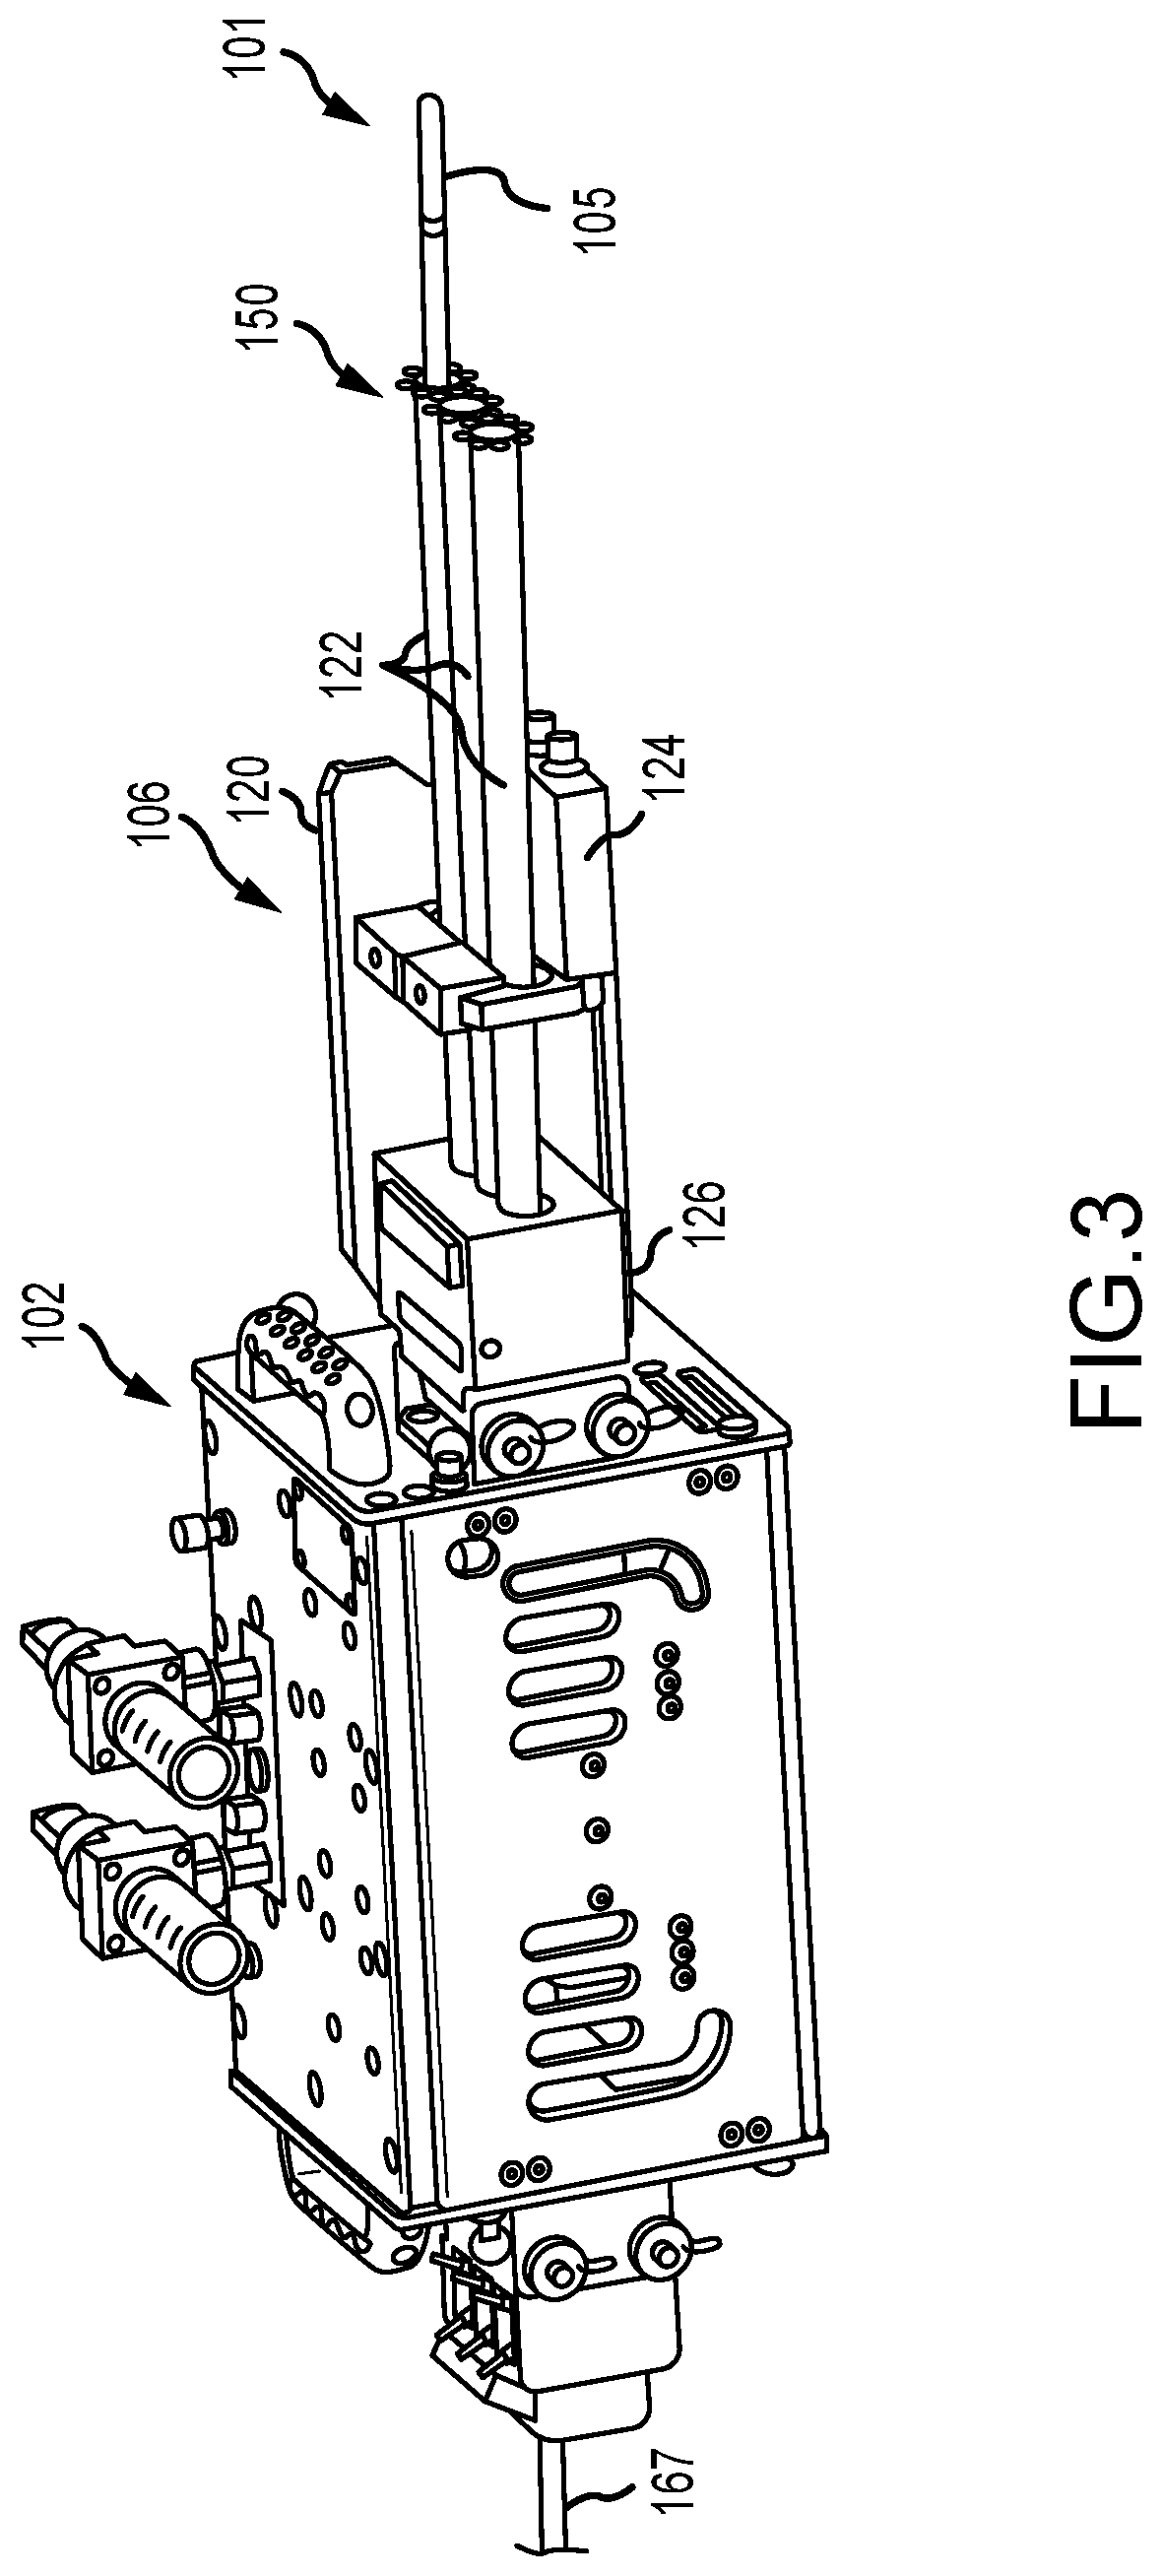 Auto-indexing lance positioner apparatus and system